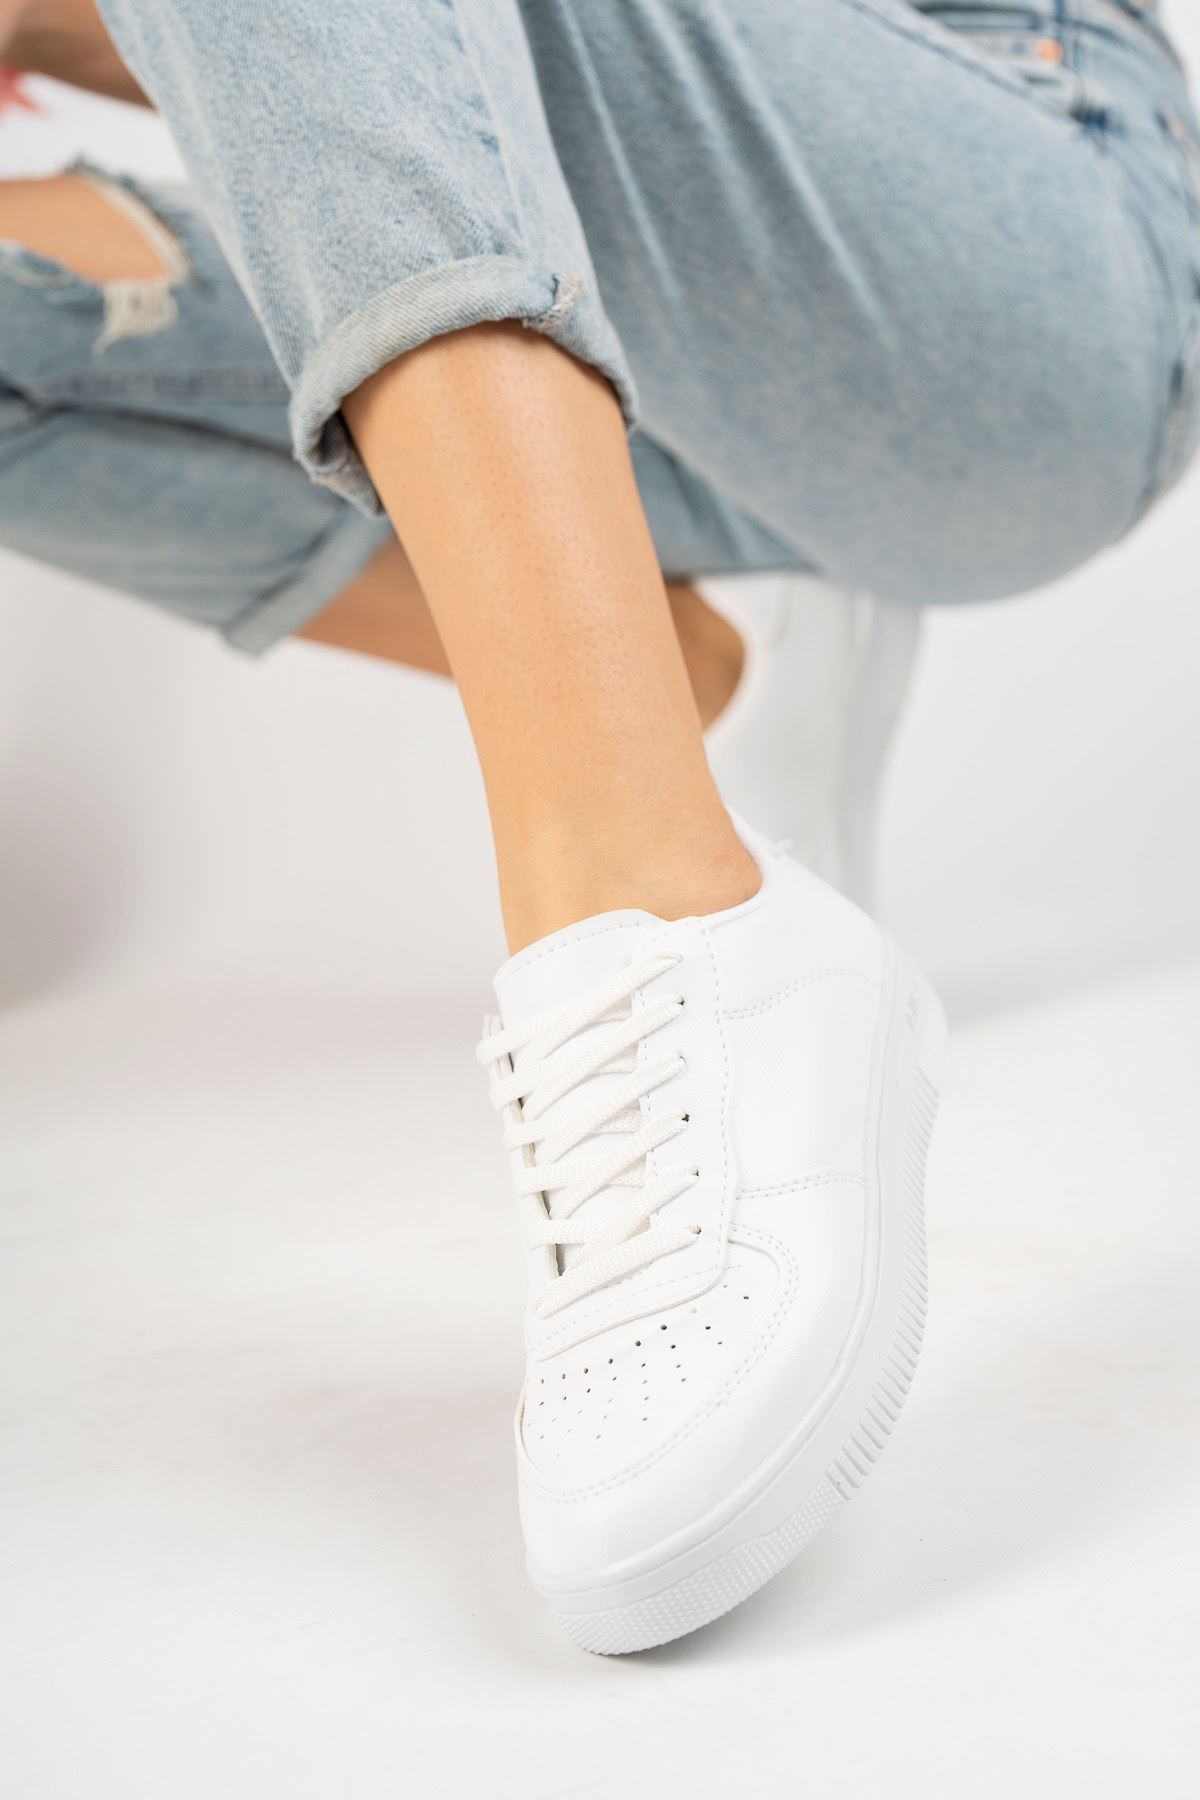 Thermo Sole Flat White Skin Sneakers